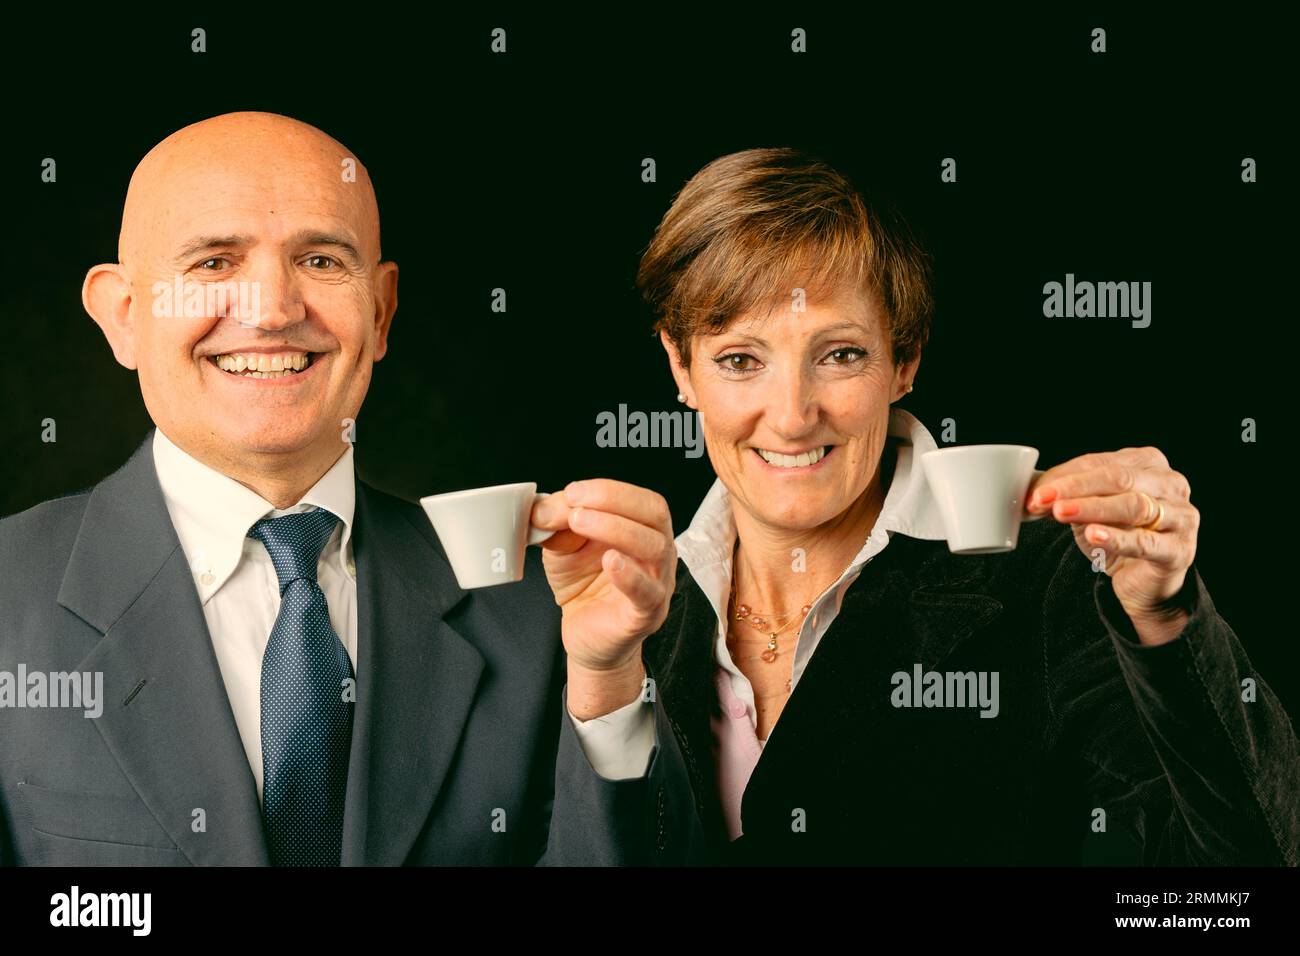 Portrayed elegantly against black, two wealthy elderly enjoy Italian espresso on their European voyage. While he's bald with jacket and shirt, she fla Stock Photo